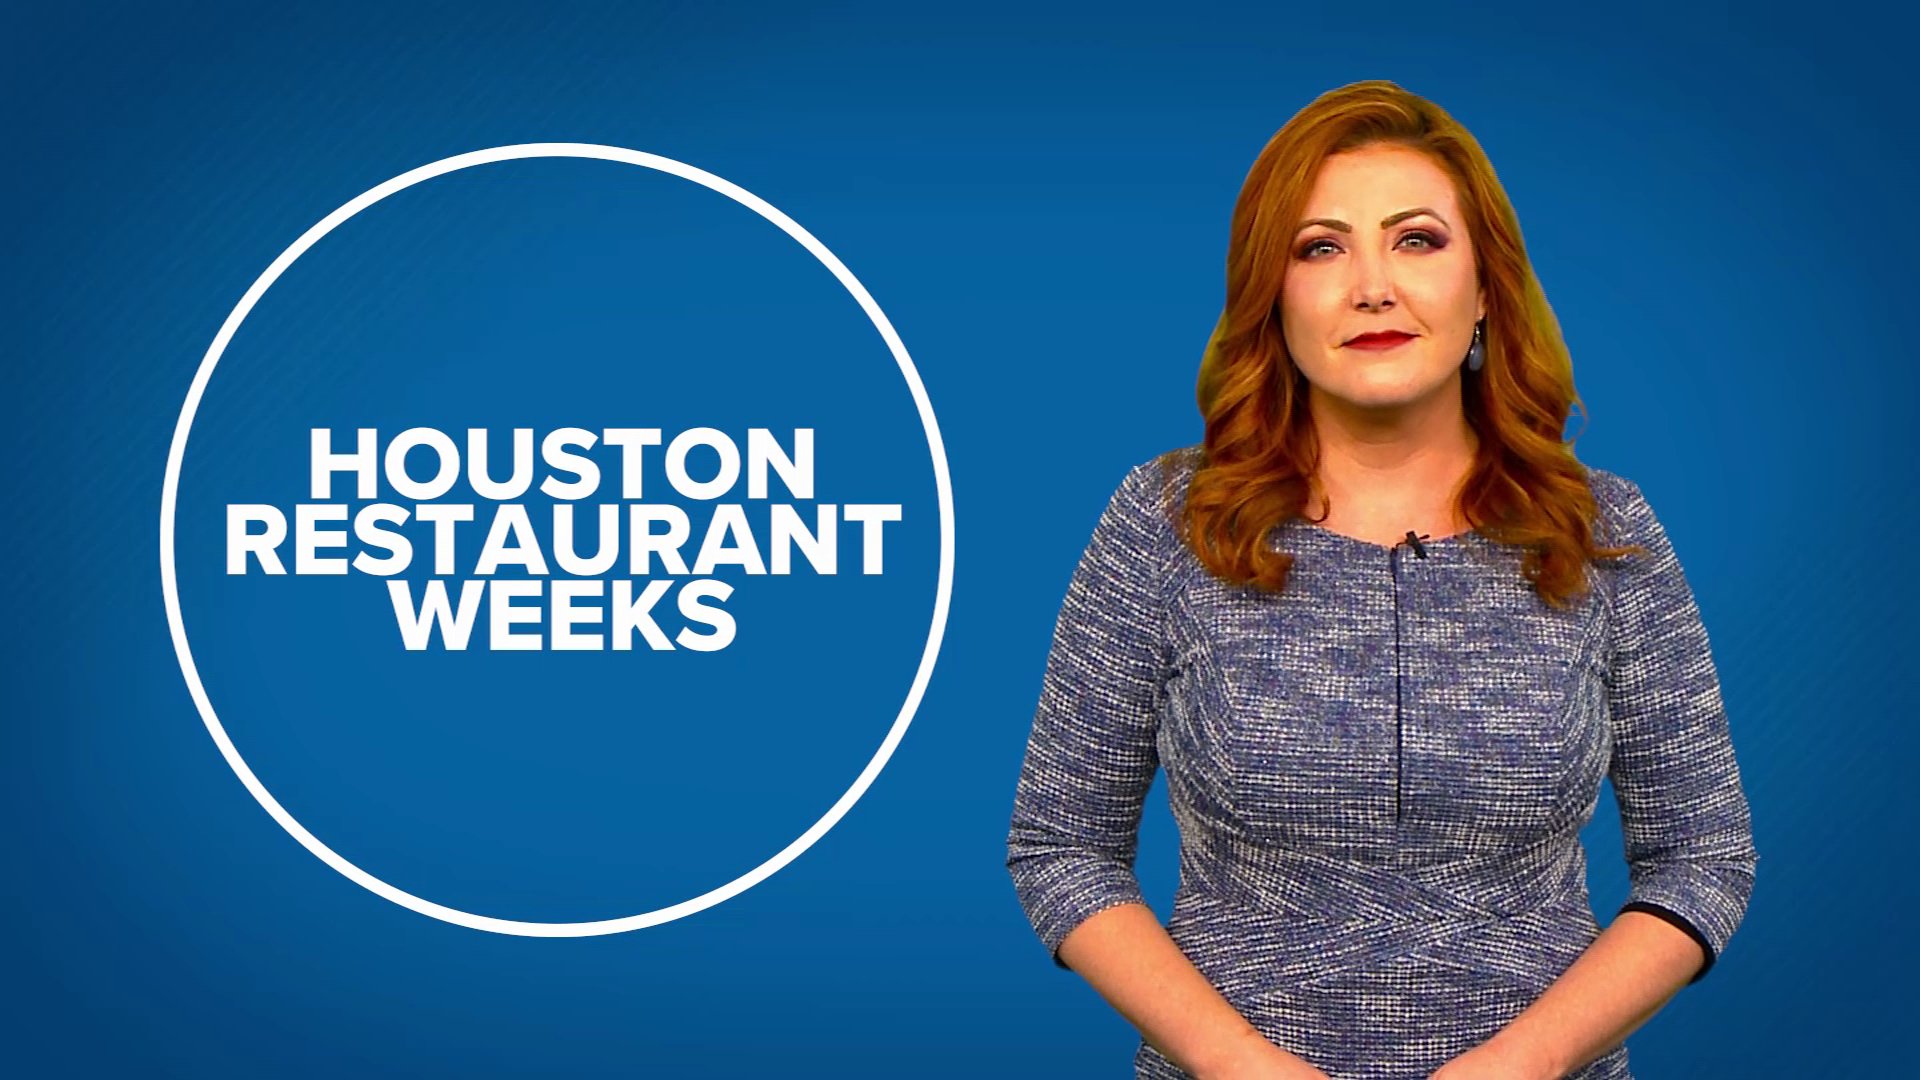 Brandi Smith explains what you need to know about this weeks-long culinary celebration.